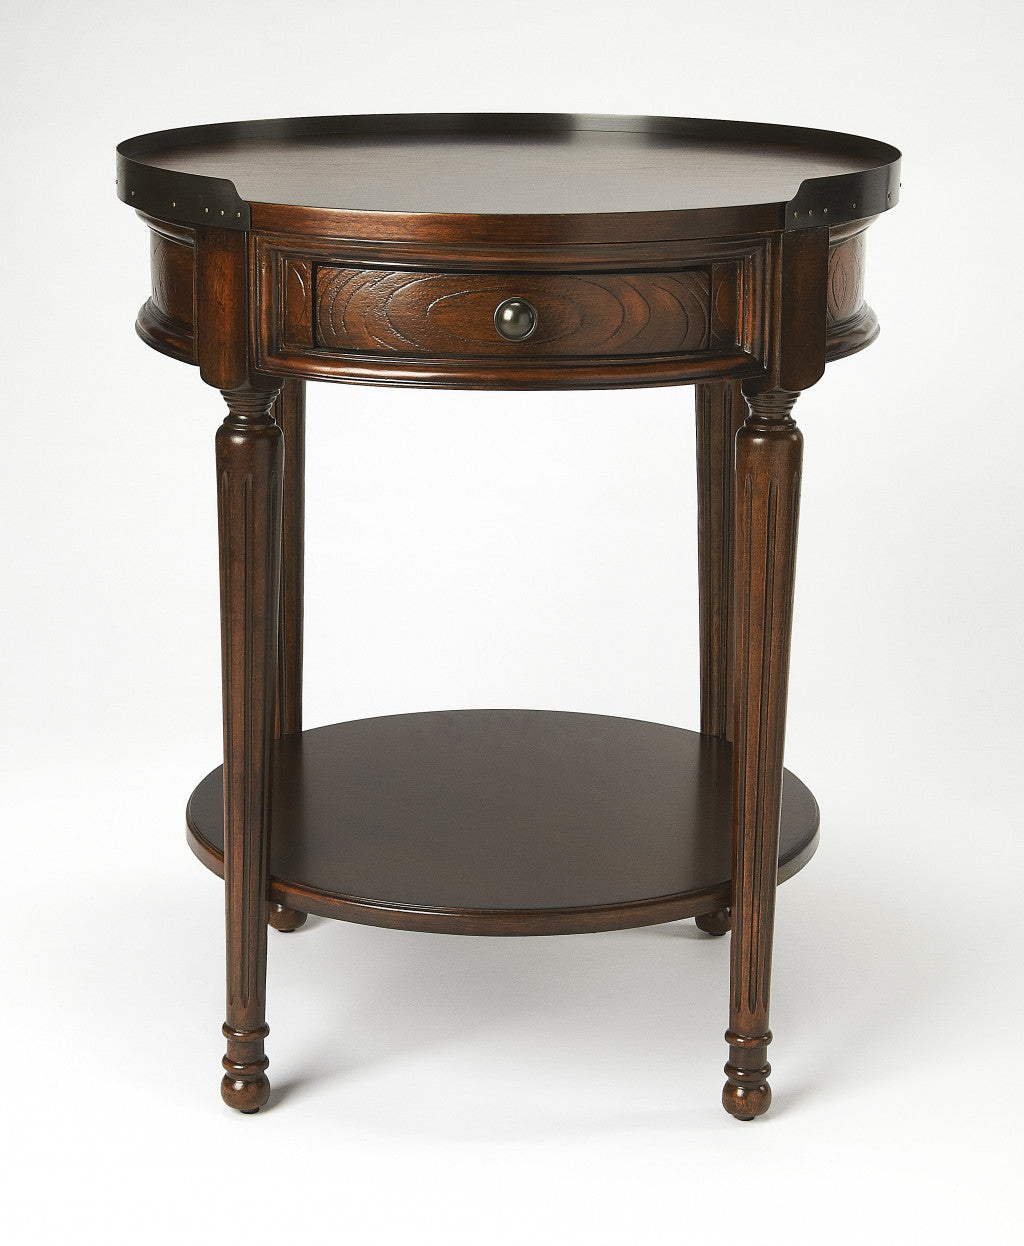 26" Dark Brown Manufactured Wood Round End Table With Drawer And Shelf By Homeroots